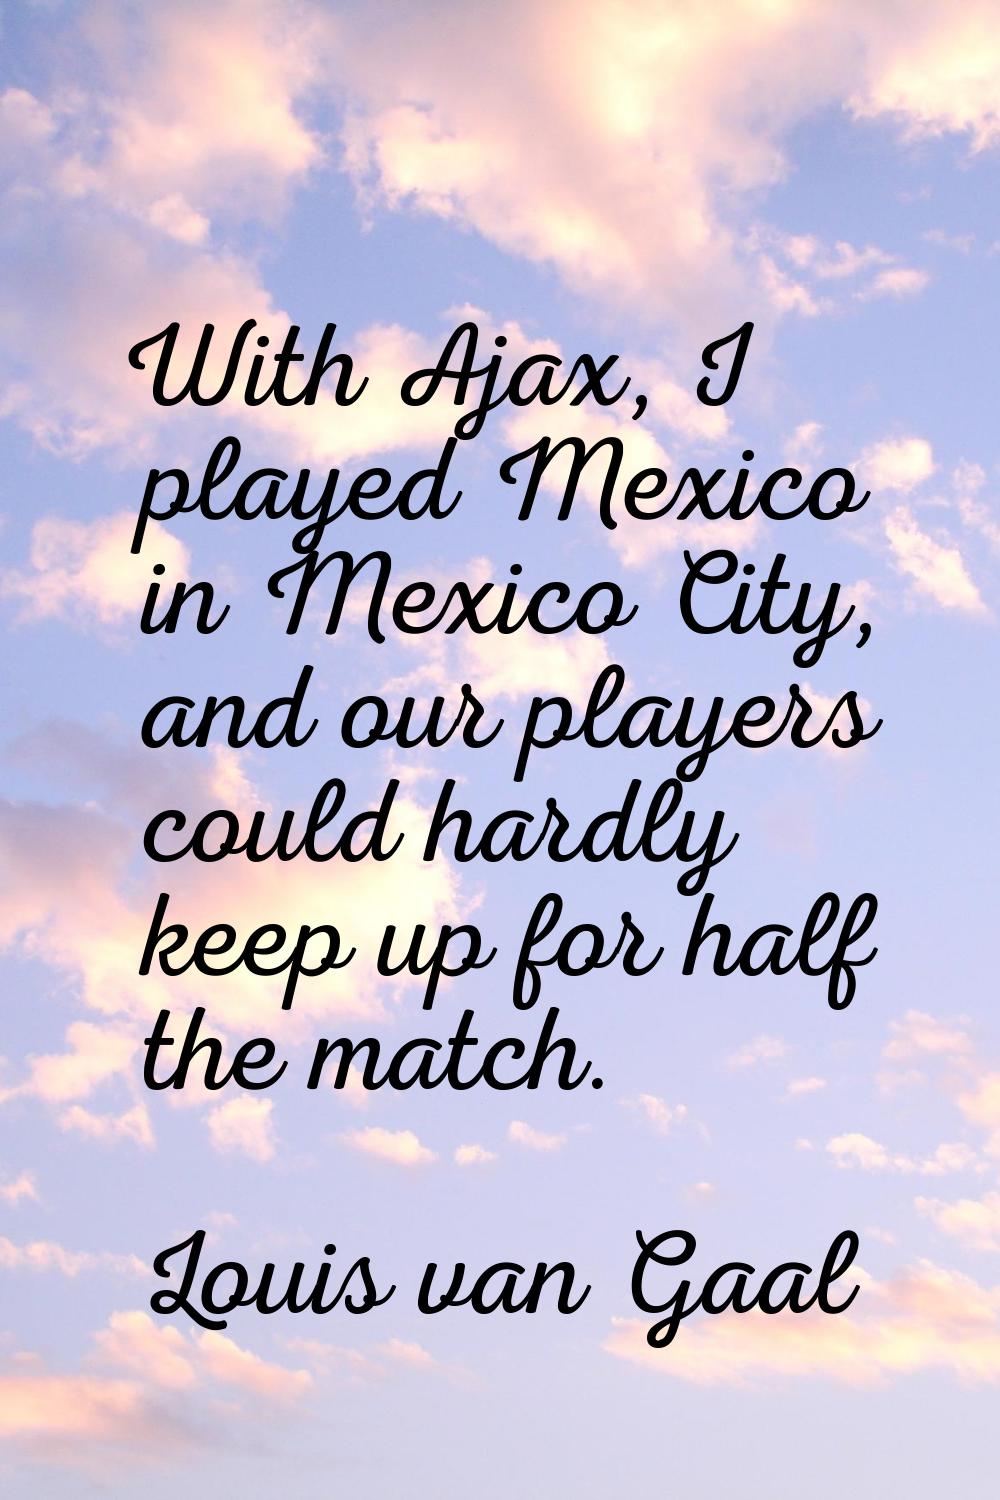 With Ajax, I played Mexico in Mexico City, and our players could hardly keep up for half the match.